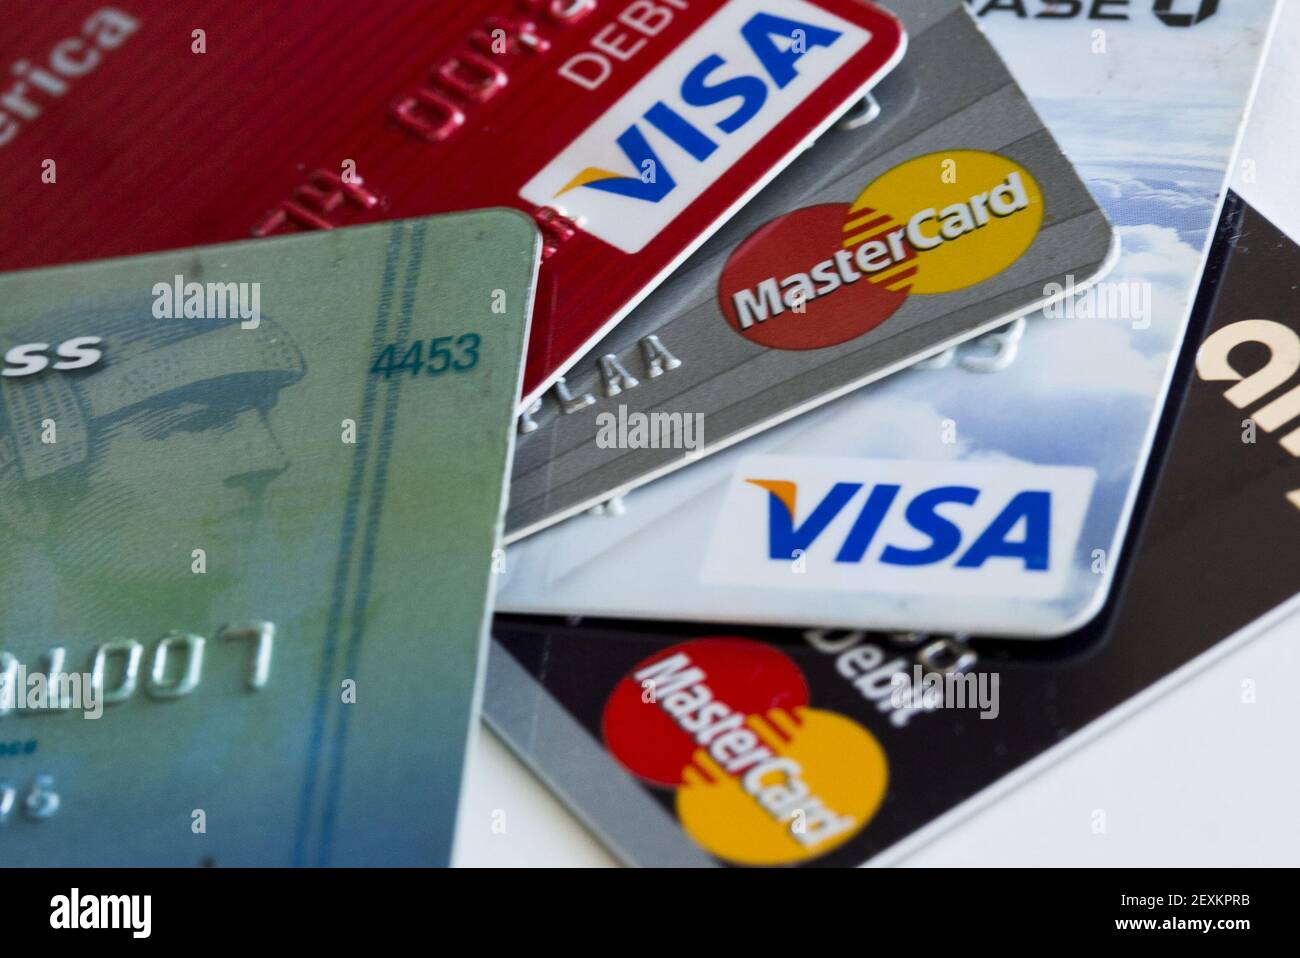 Arranged photos of various U.S. credit cards from Visa, MasterCard and  American Express on February 14, 2014 in Washington, DC. Photo Credit:  Kristoffer Tripplaar/ Sipa USA Stock Photo - Alamy